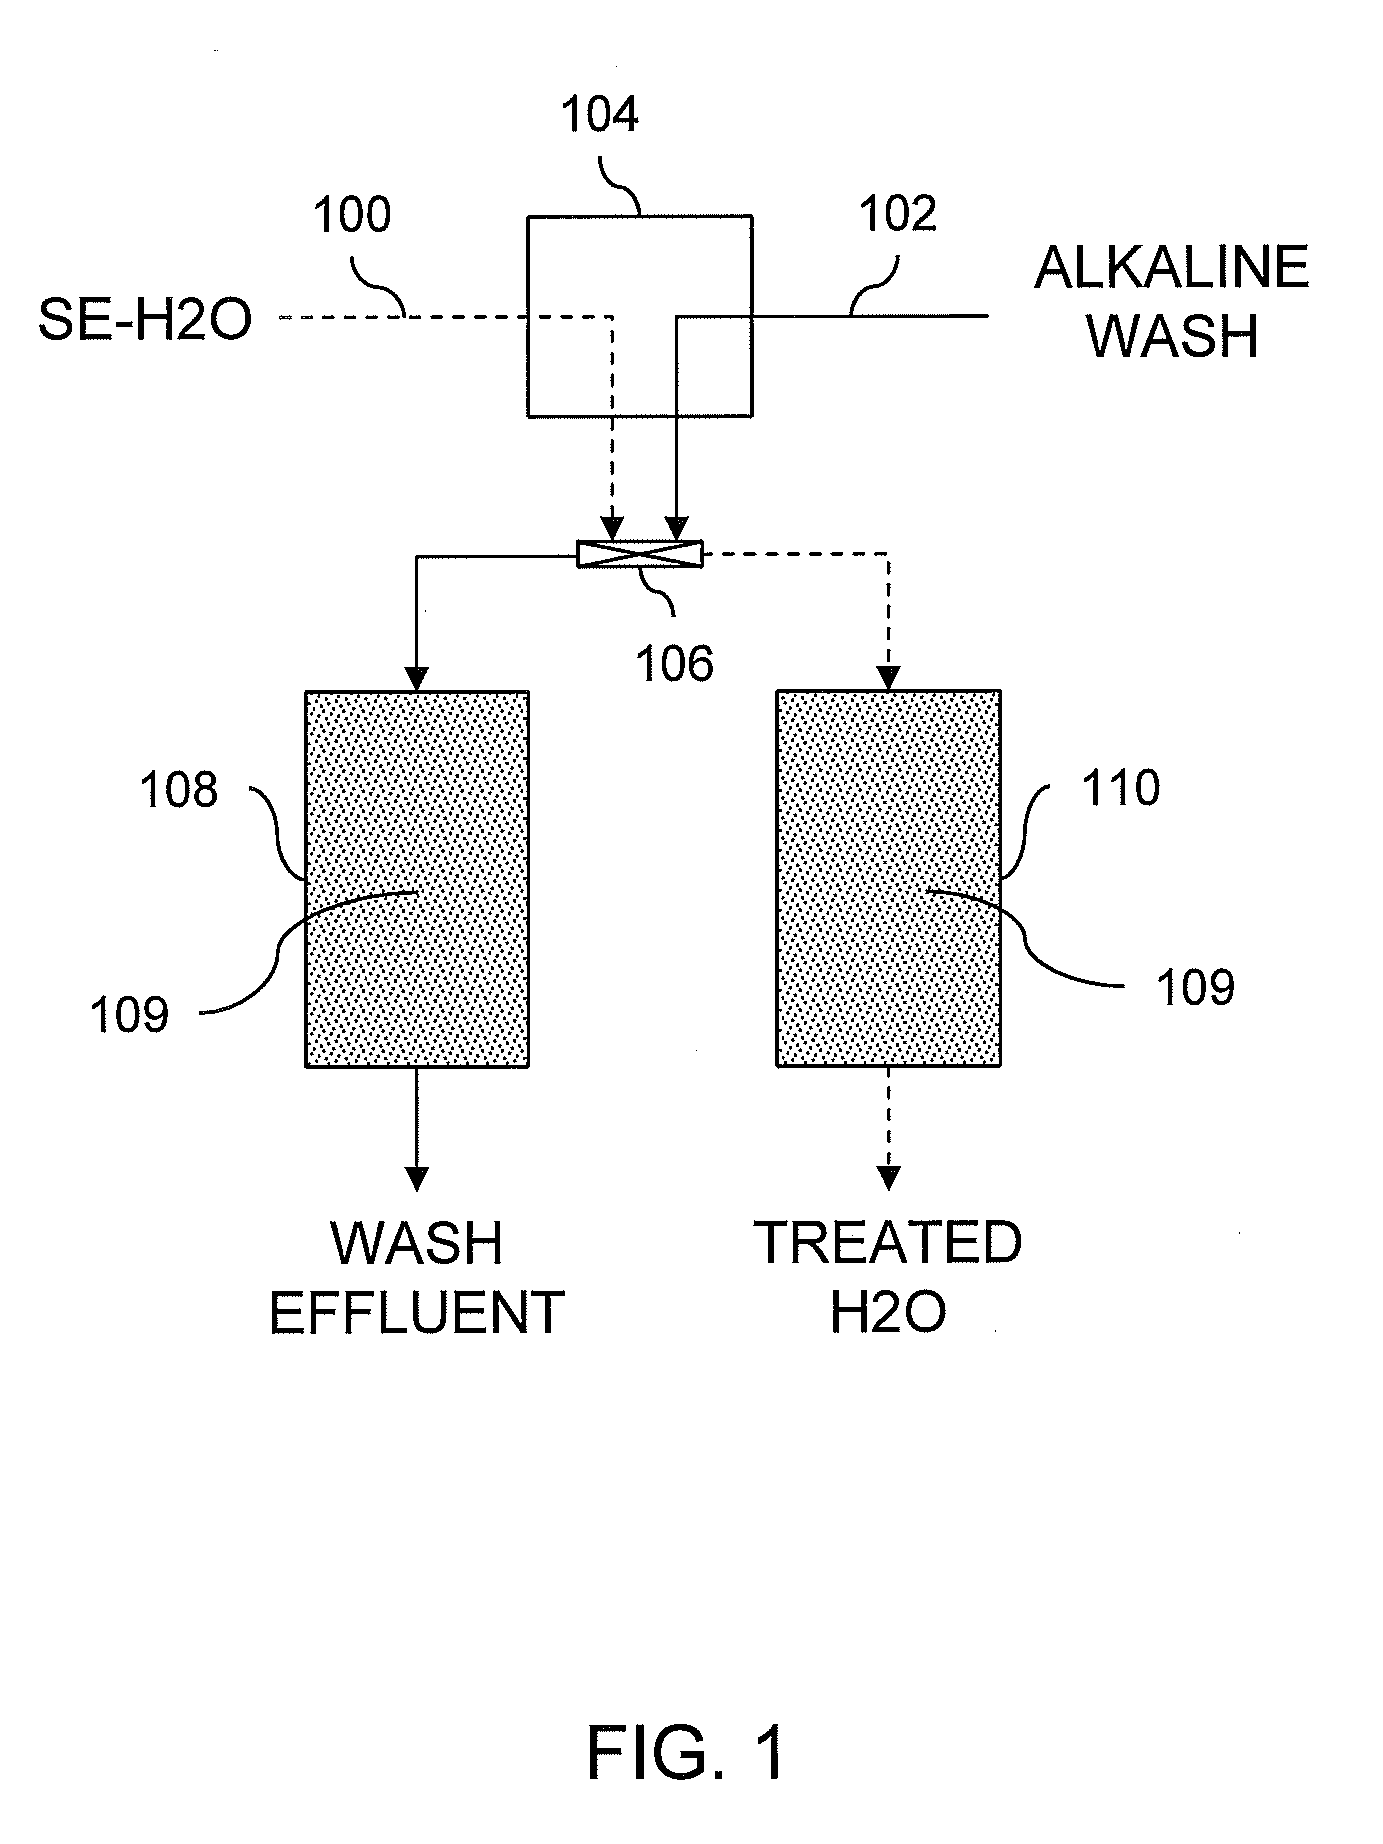 Operations of selenium removal sorbent beds